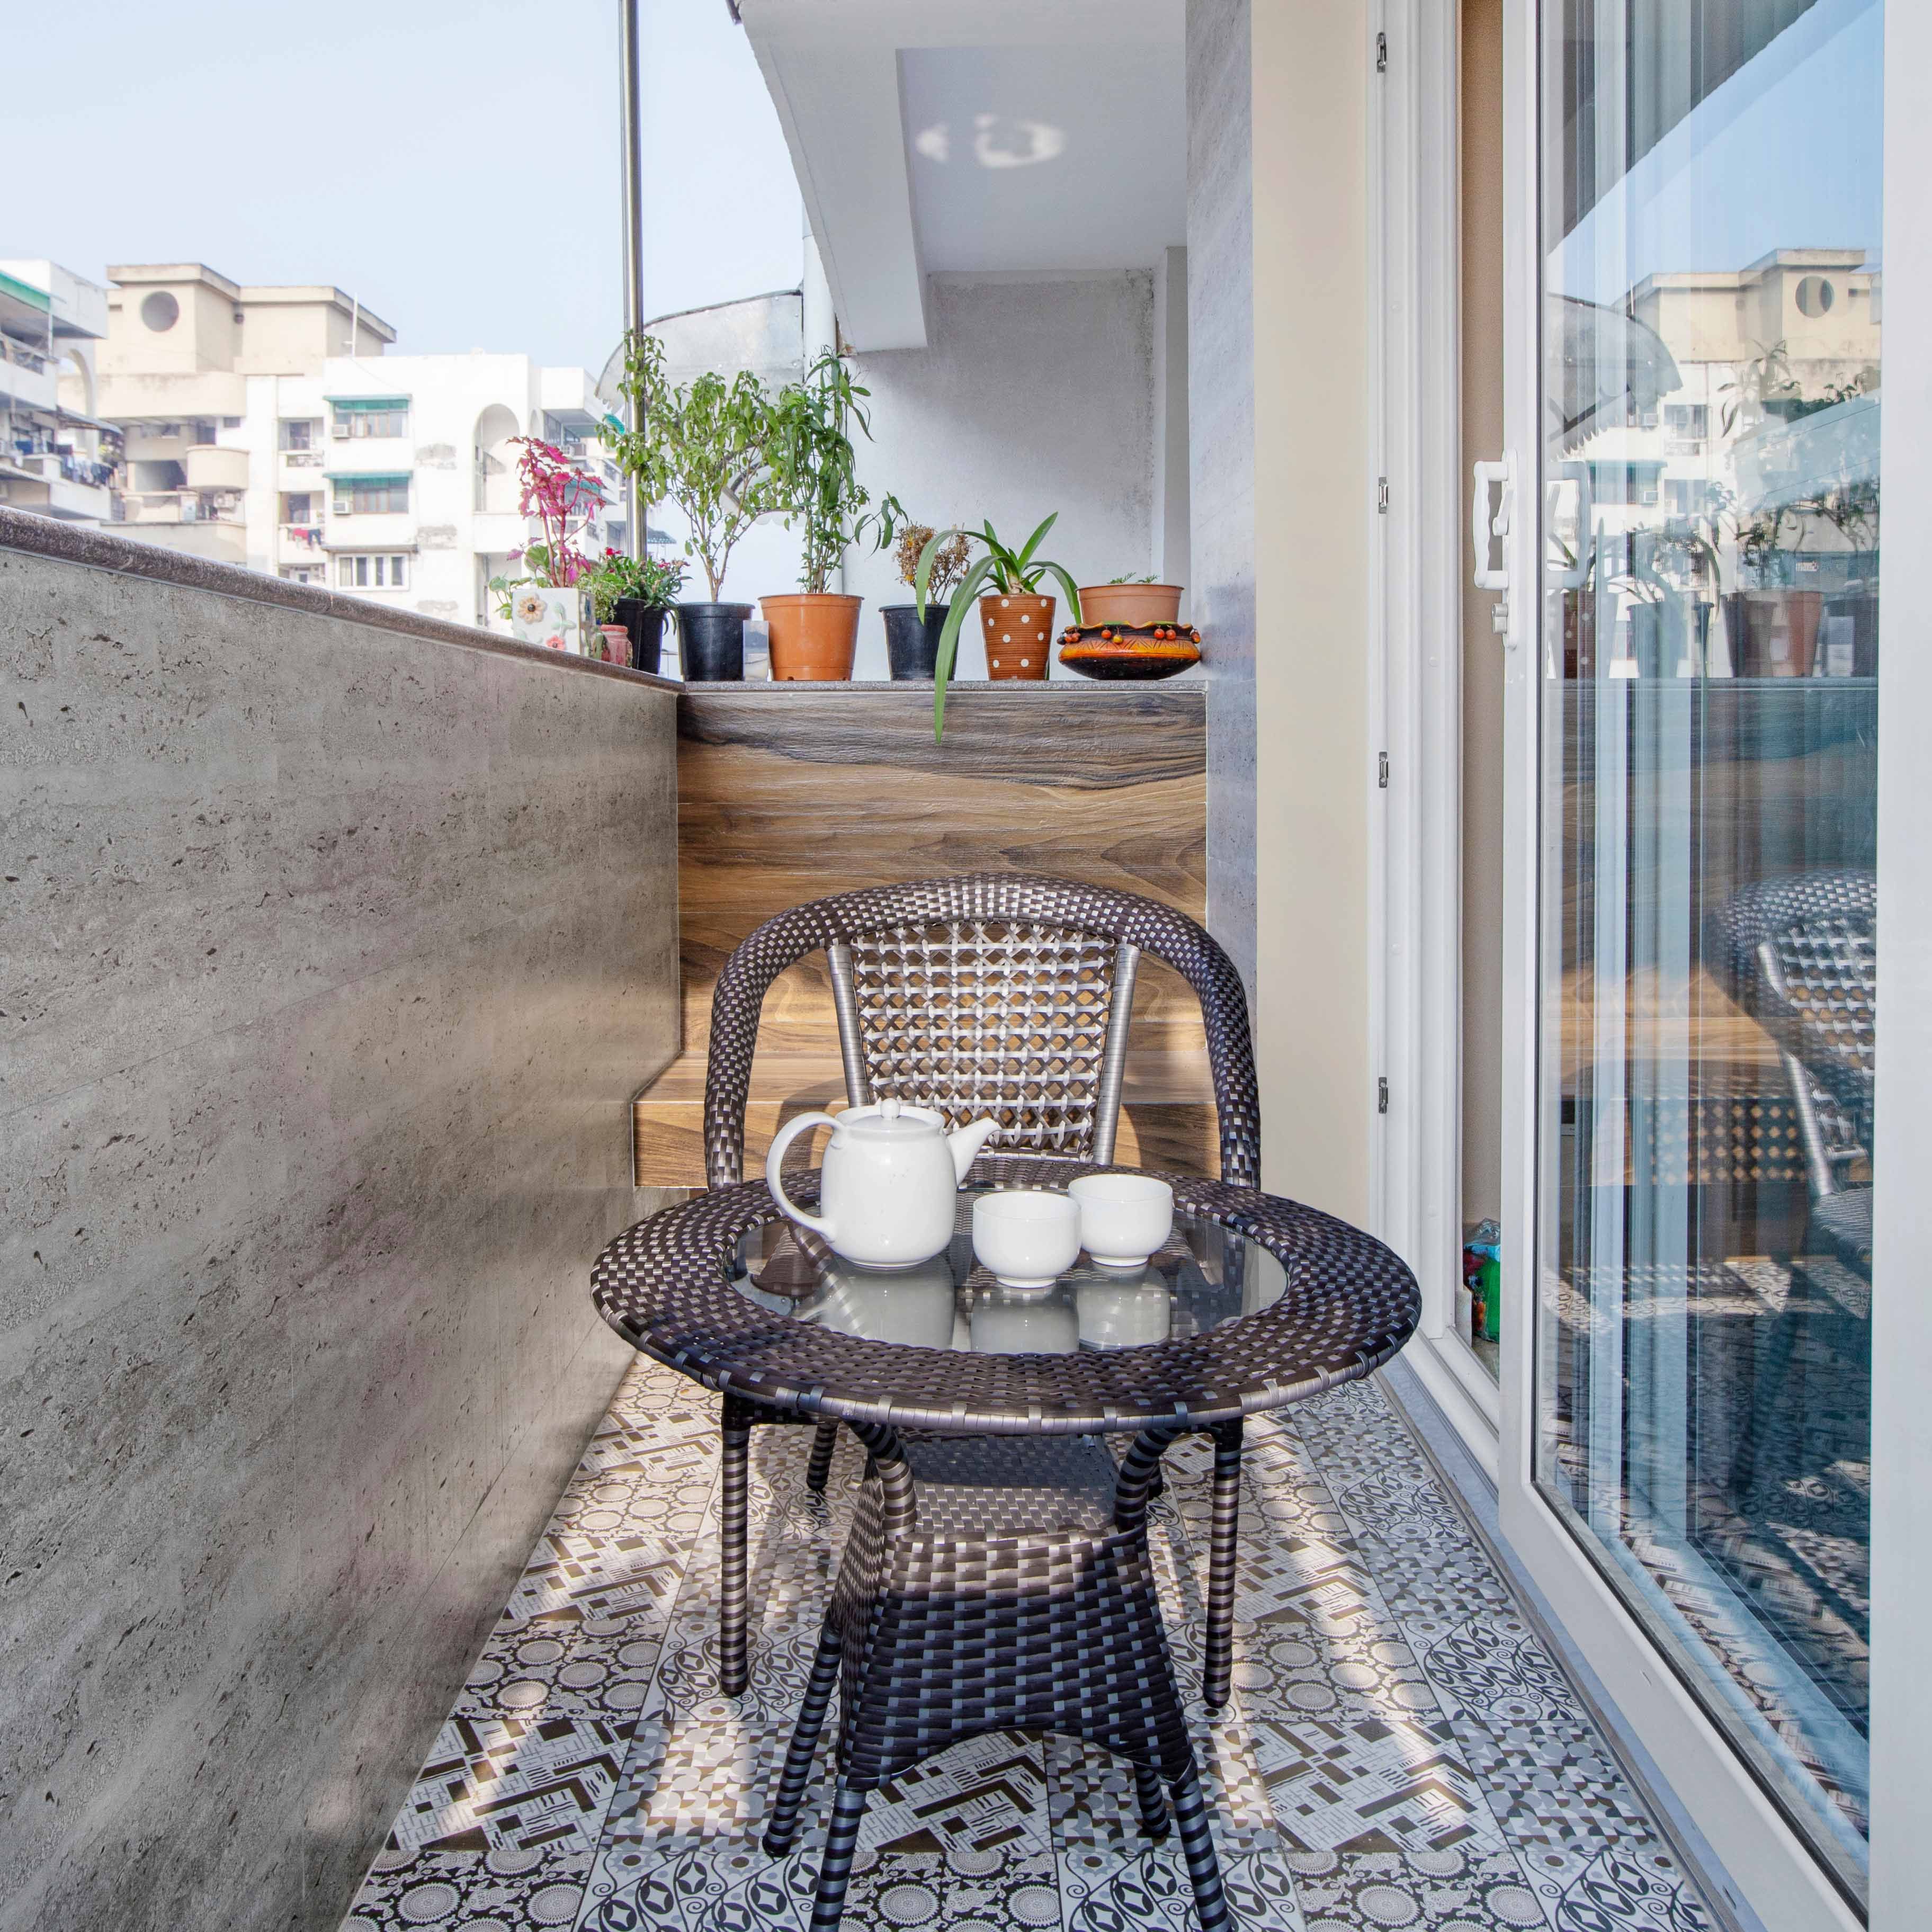 Eclectic Balcony Design with Wooden Wall Panel and Abstract Geometric Flooring